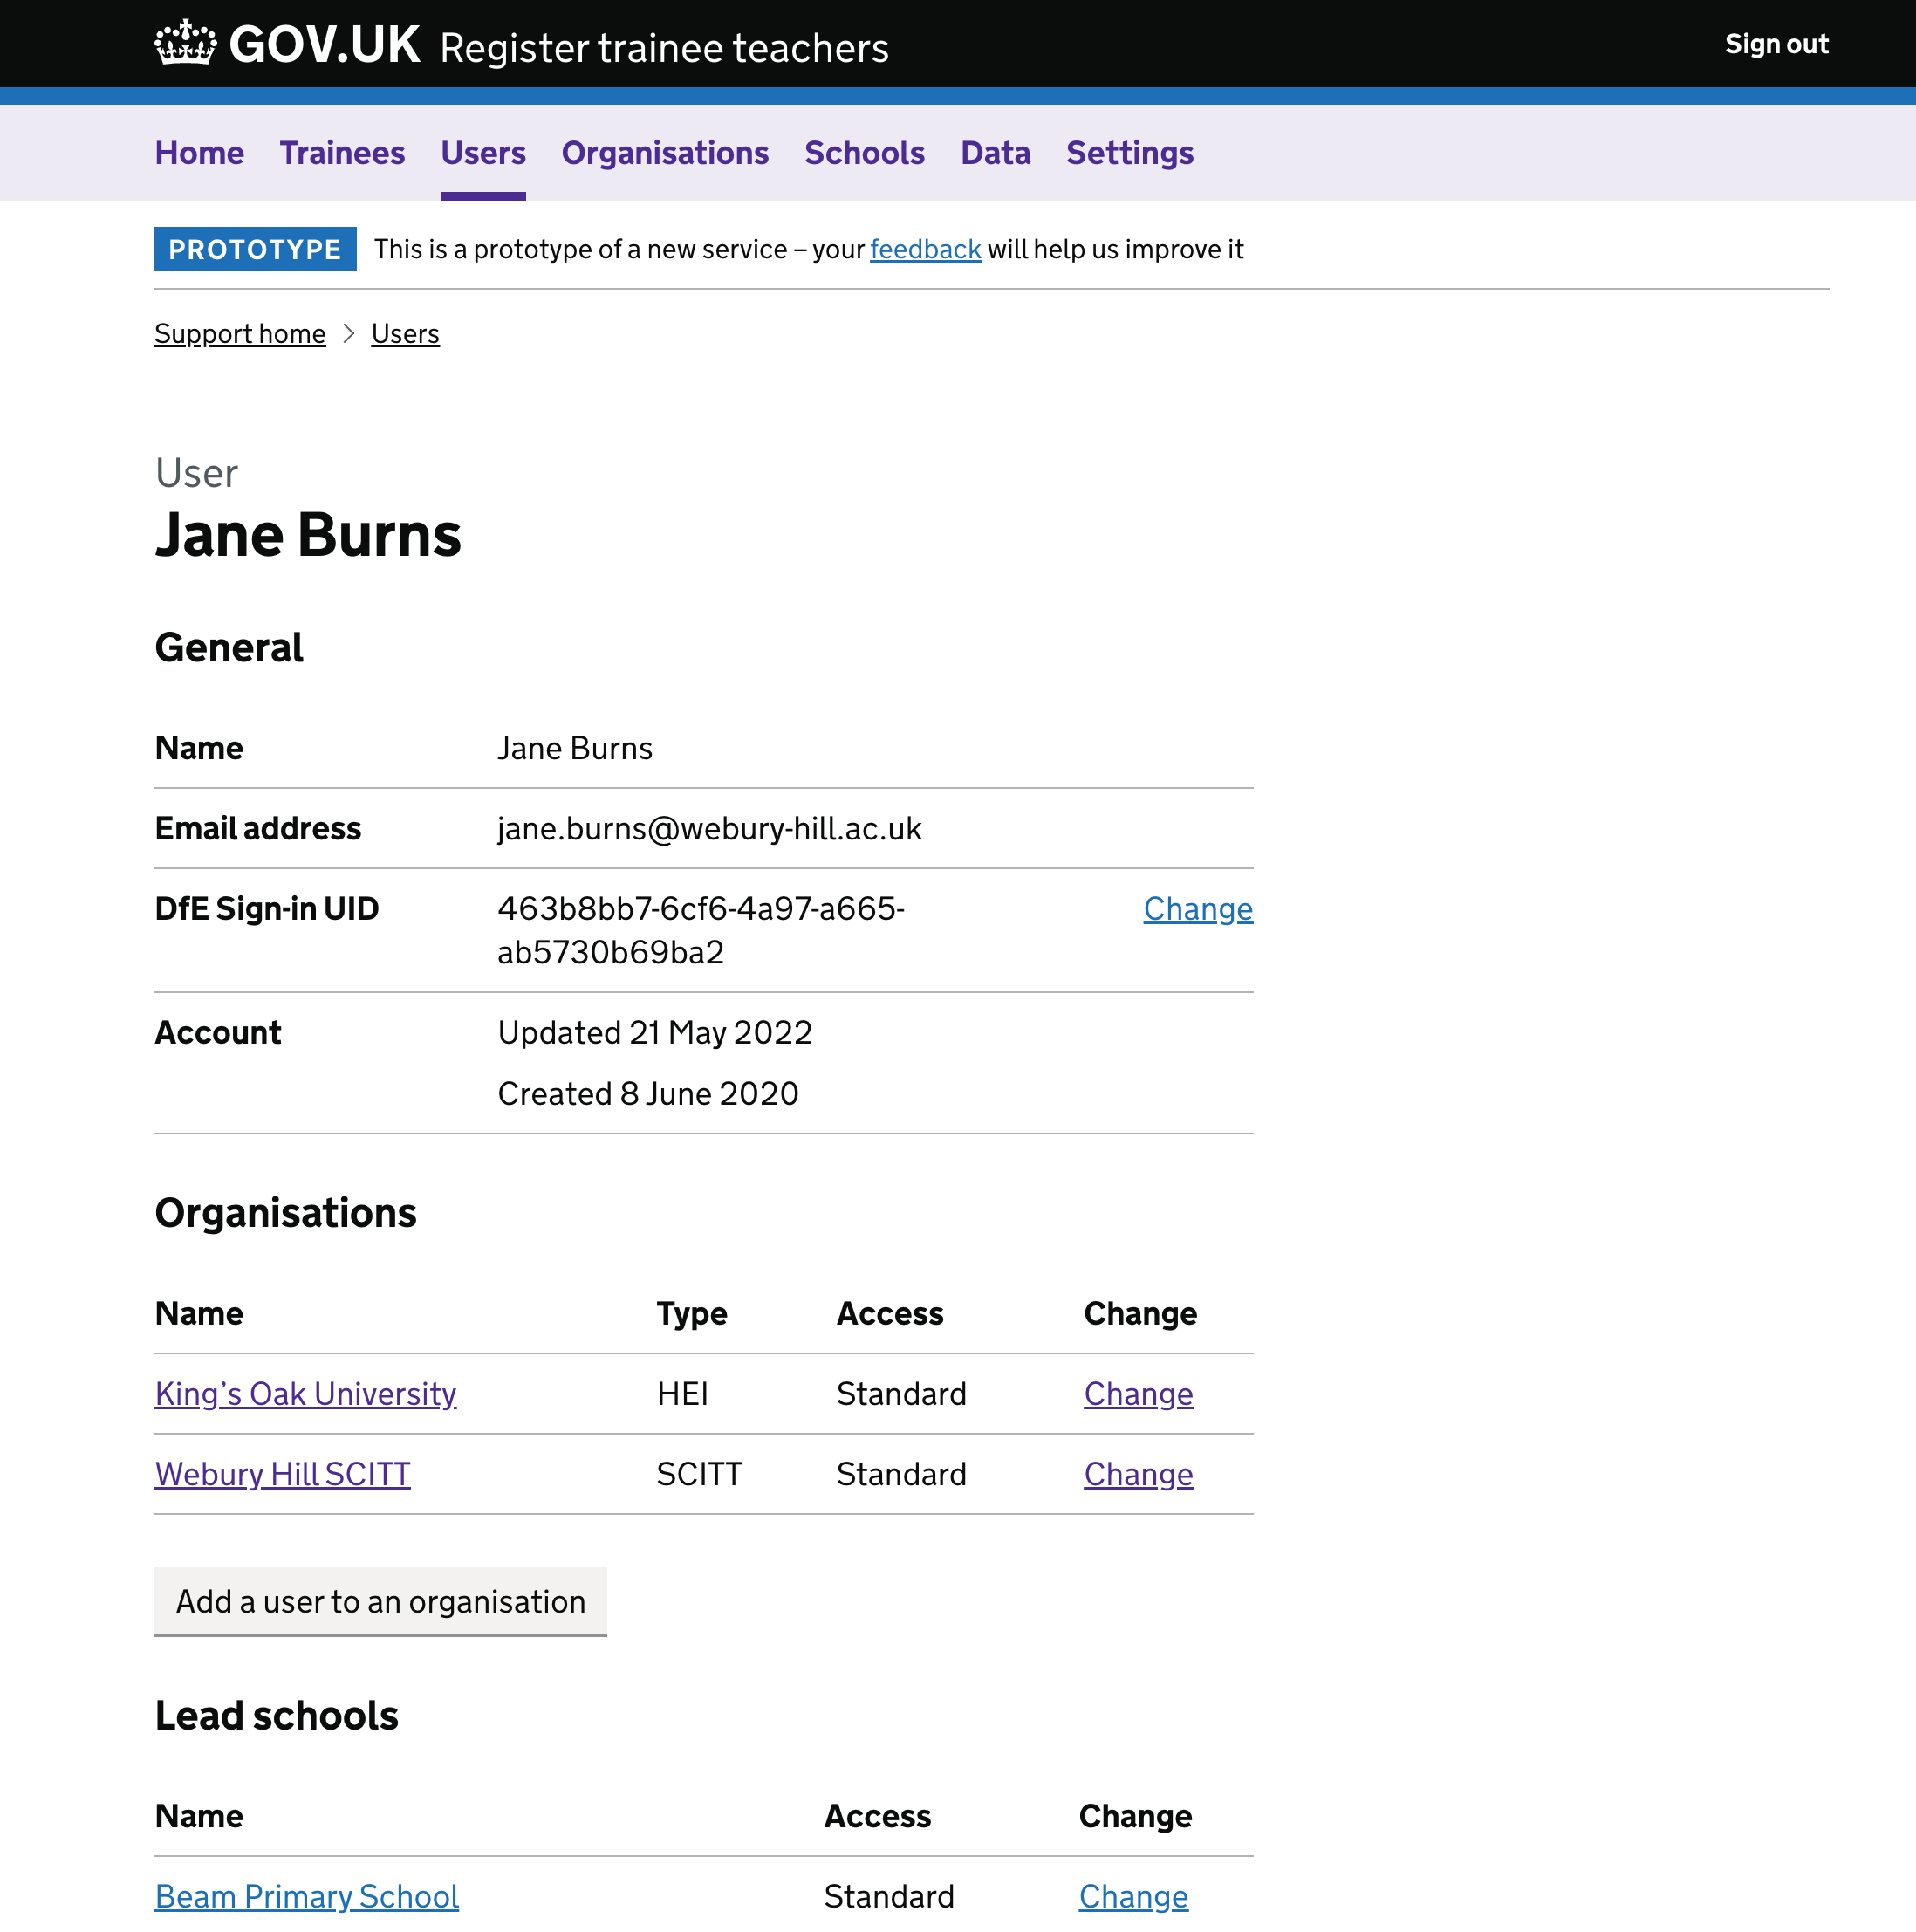 A screenshot of page showing details about a user. The page has several tables of data, some of which that have change links.